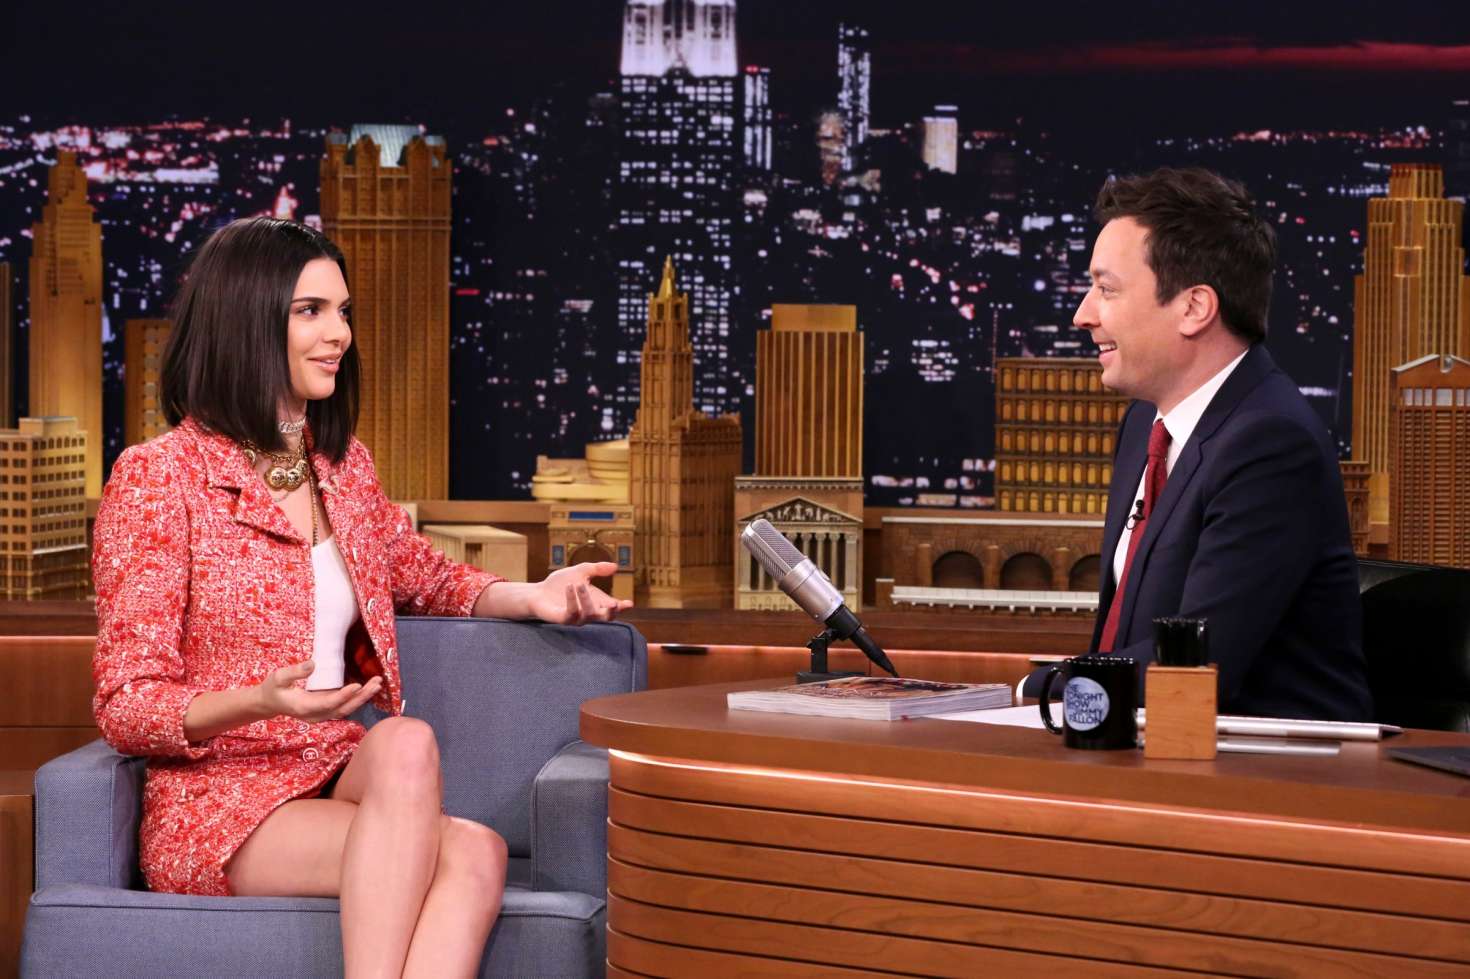 Kendall Jenner 2017 : Kendall Jenner on The Tonight Show Starring Jimmy Fal...